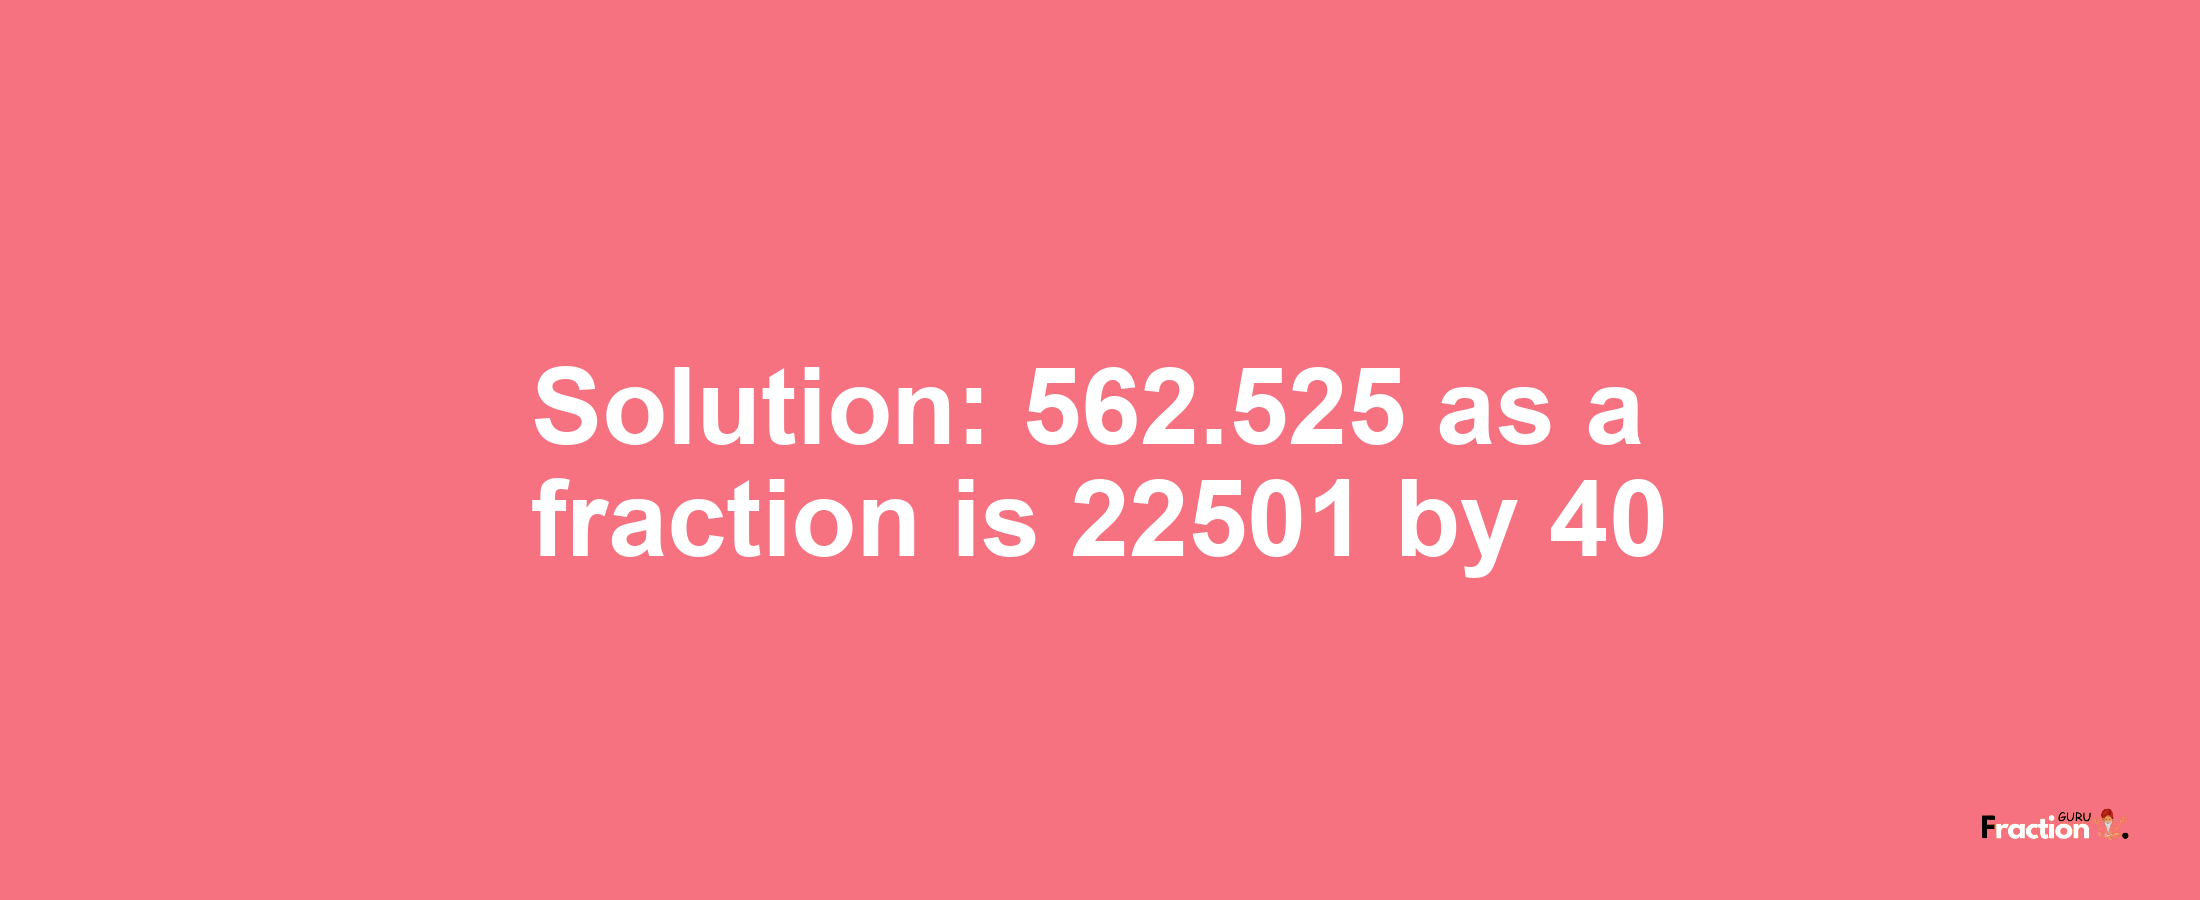 Solution:562.525 as a fraction is 22501/40